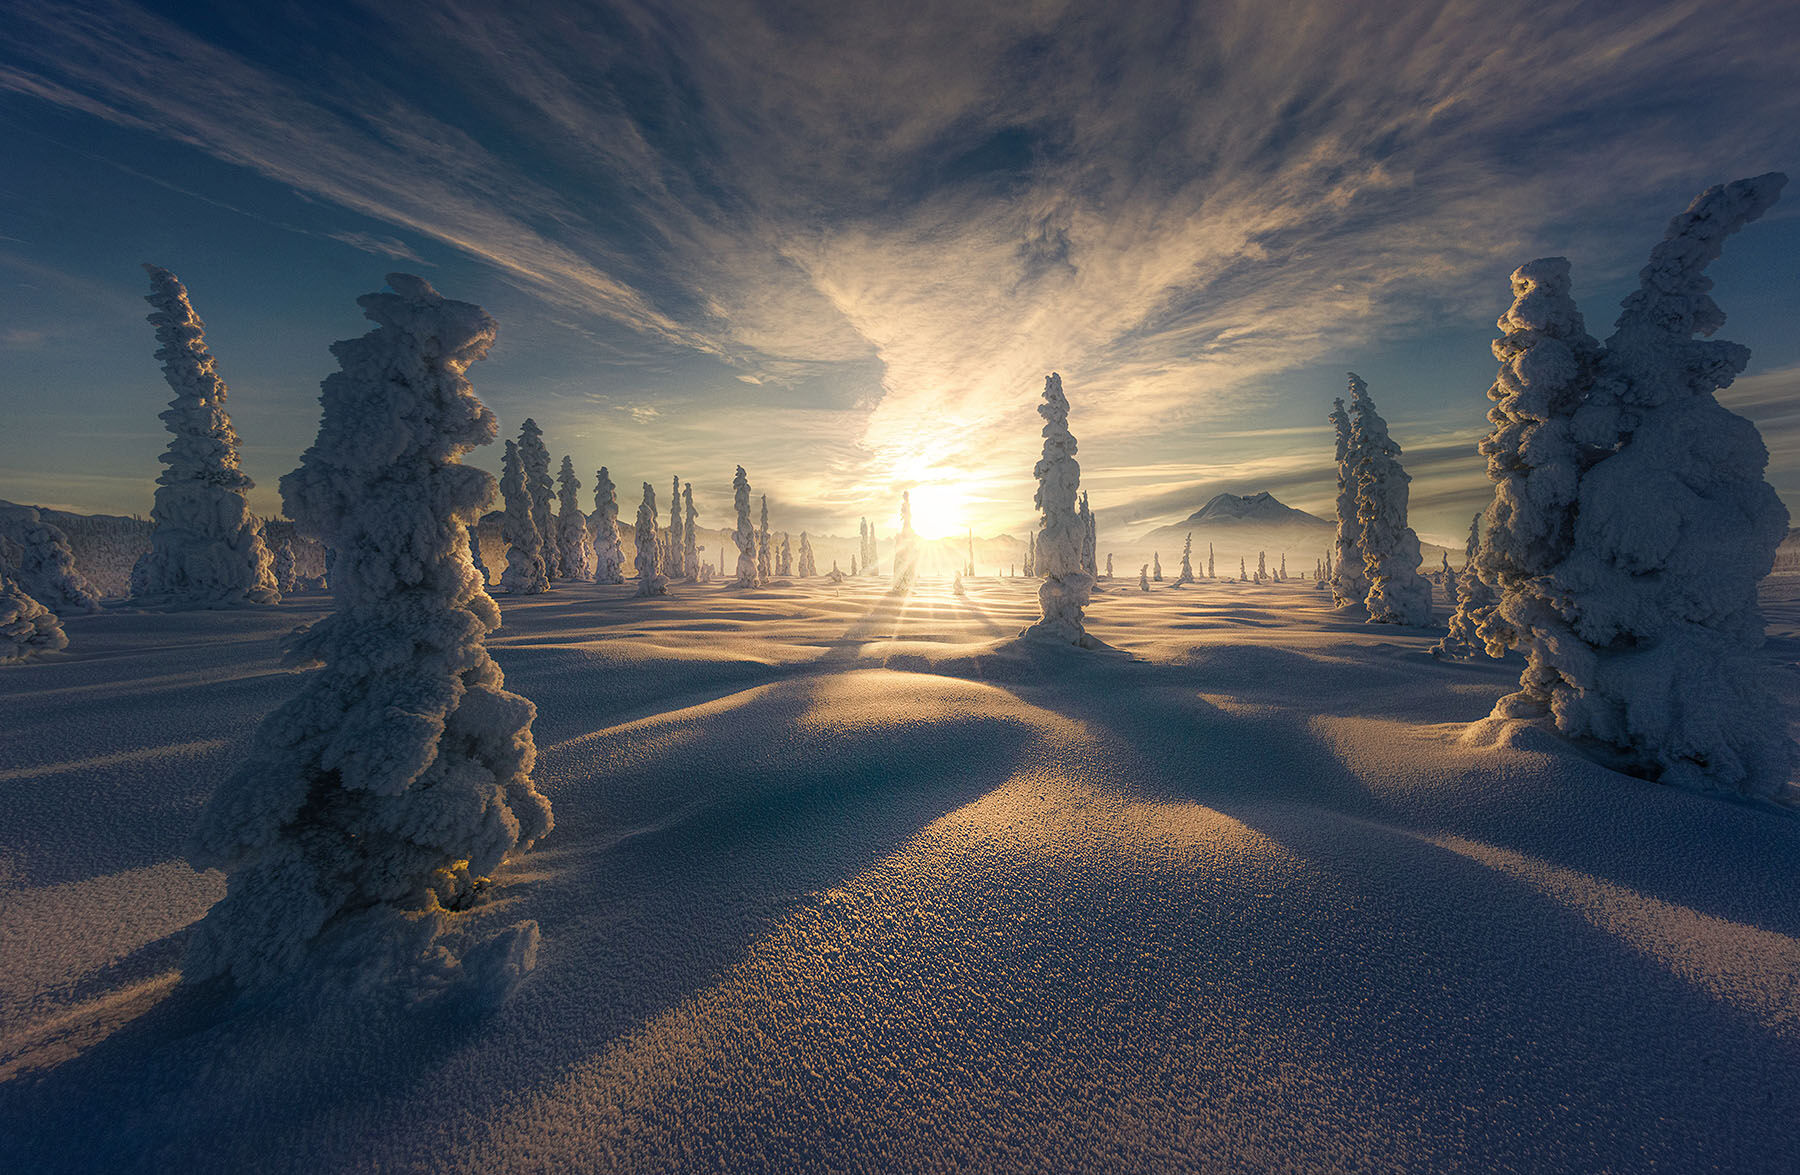 The sparkling golden light 2pm in the afternoon graces the frozen Alaskan forest